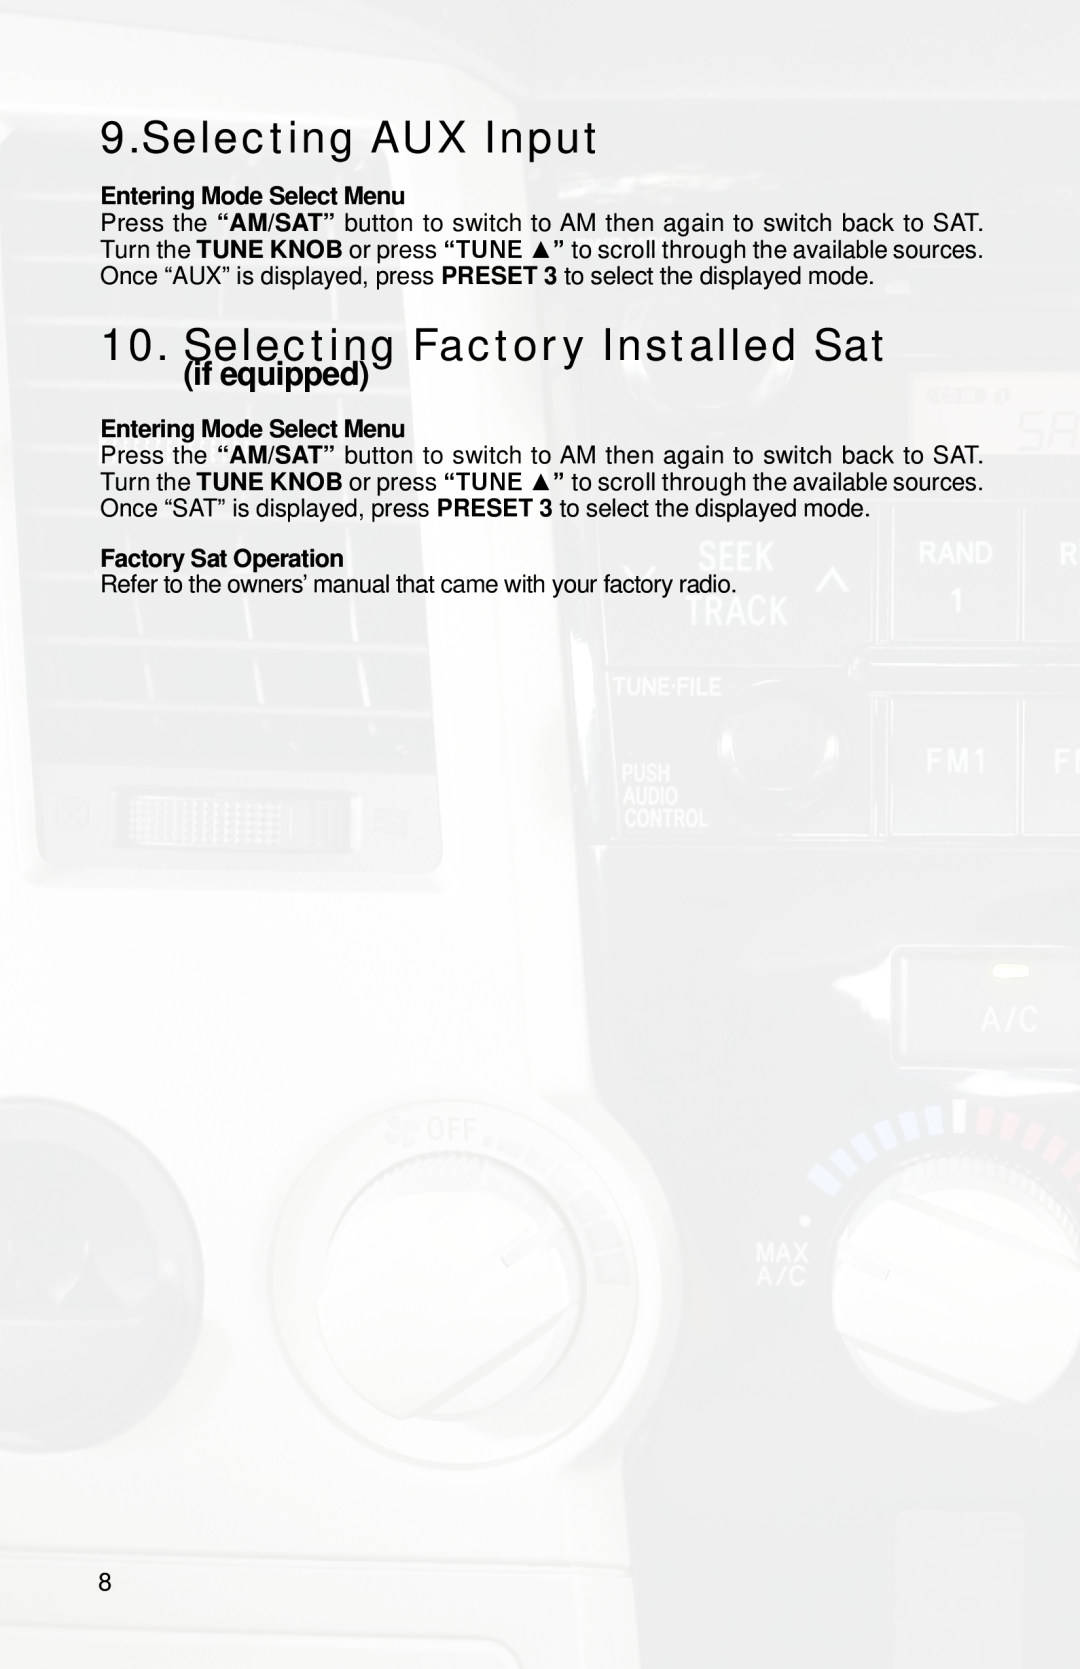 iSimple PGHTY1 owner manual Selecting AUX Input, Selecting Factory Installed Sat, if equipped 